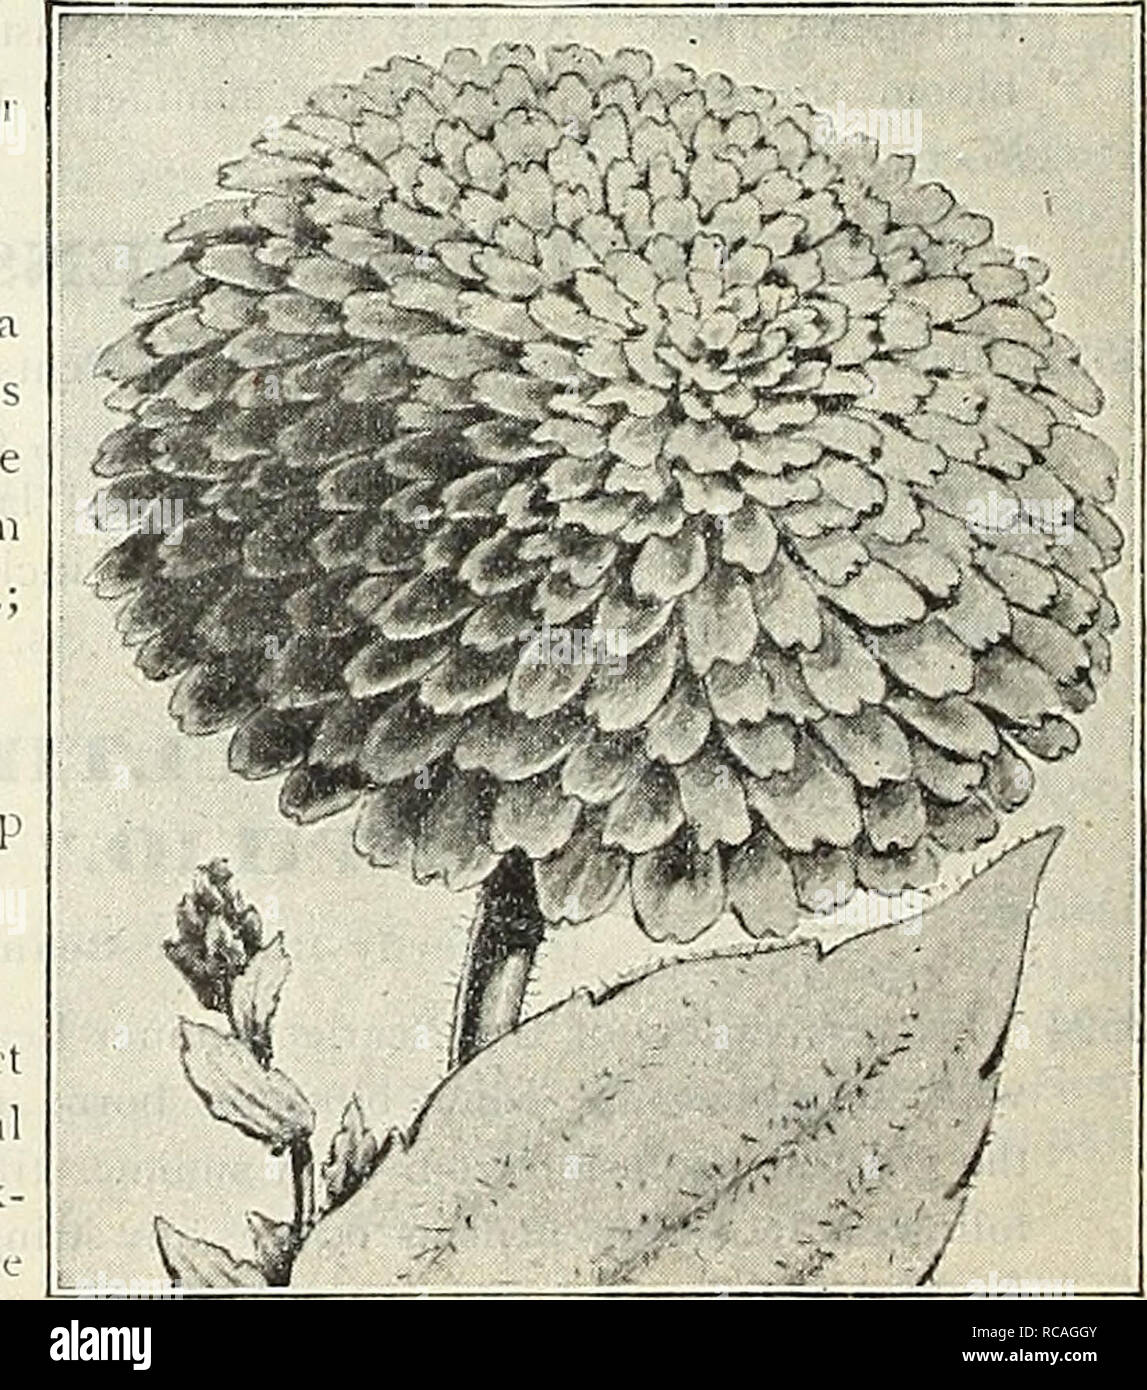 . Dreer's 1838 1908 garden book. Seeds Catalogs; Nursery stock Catalogs; Gardening Equipment and supplies Catalogs; Flowers Seeds Catalogs; Vegetables Seeds Catalogs; Fruit Seeds Catalogs. RUDBECKIA BICOLOR StiPERBA PLENA. 3905 The single and semi-double-flowering forms of this showy annual are favorably known to many gar- deners, and we feel sure this new completely double- flowering type will soon be popular. The plant grows from 18 to 24 inches high, the double Zin- nia-like flowers are golden-yellow with a dark brown tip at the base of the petals. Very free-flow- ering over a season, which Stock Photo